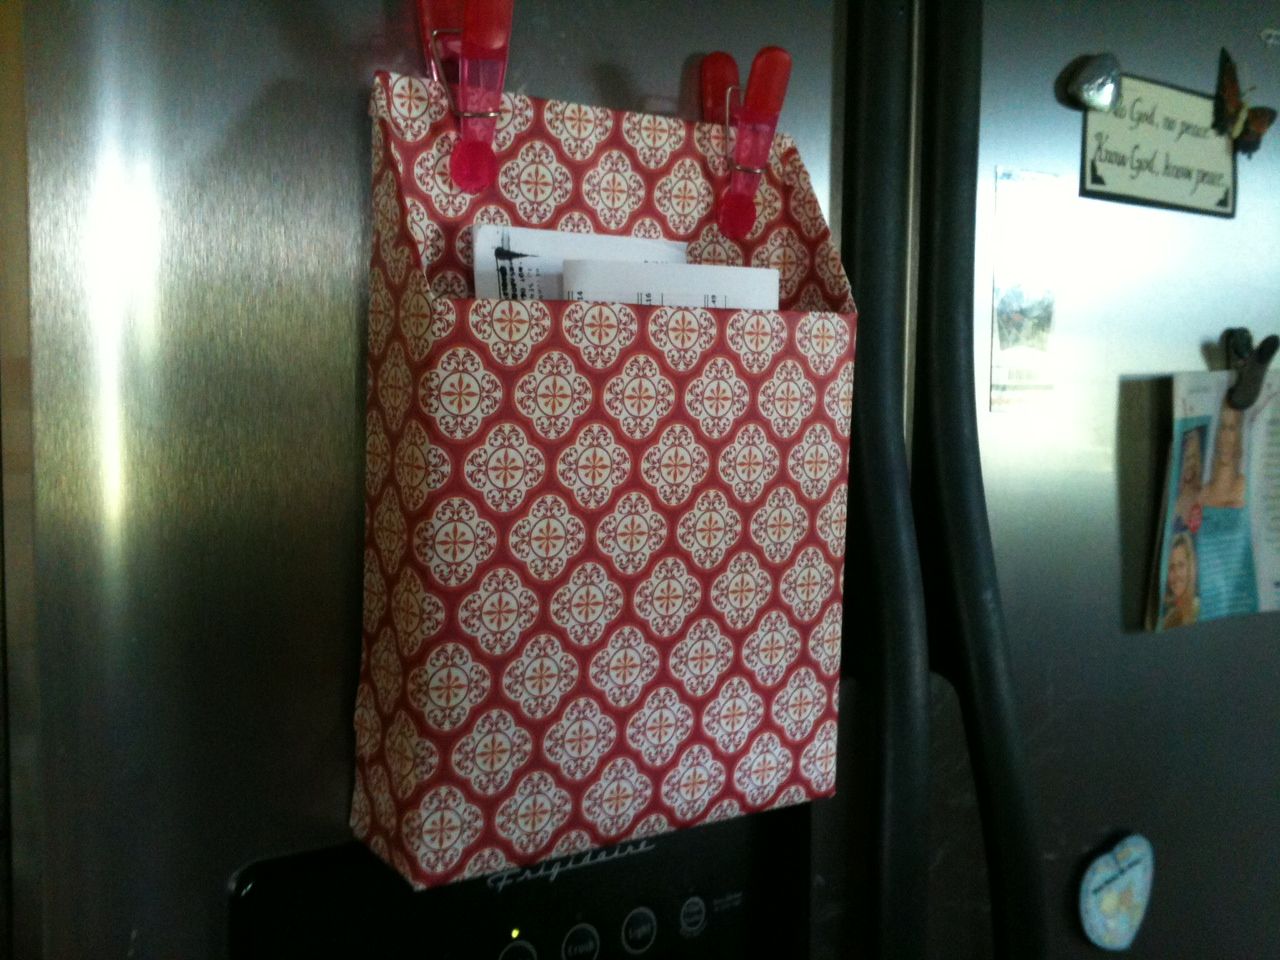 Cereal box covered in scrapbook paper with magnets on the side of the fridge. Gr